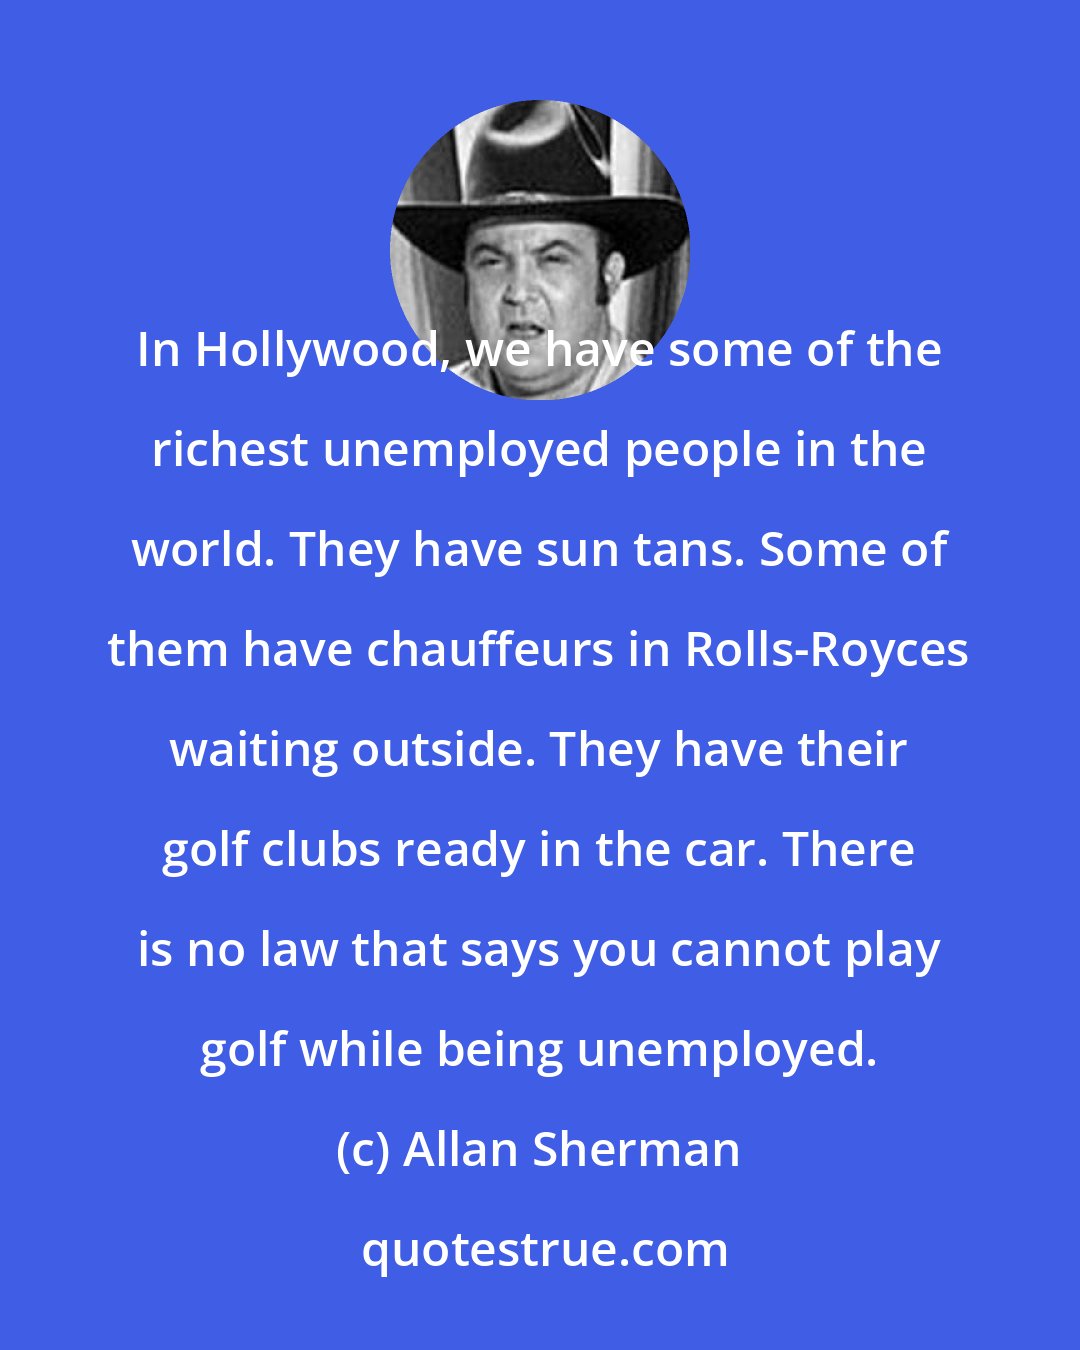 Allan Sherman: In Hollywood, we have some of the richest unemployed people in the world. They have sun tans. Some of them have chauffeurs in Rolls-Royces waiting outside. They have their golf clubs ready in the car. There is no law that says you cannot play golf while being unemployed.